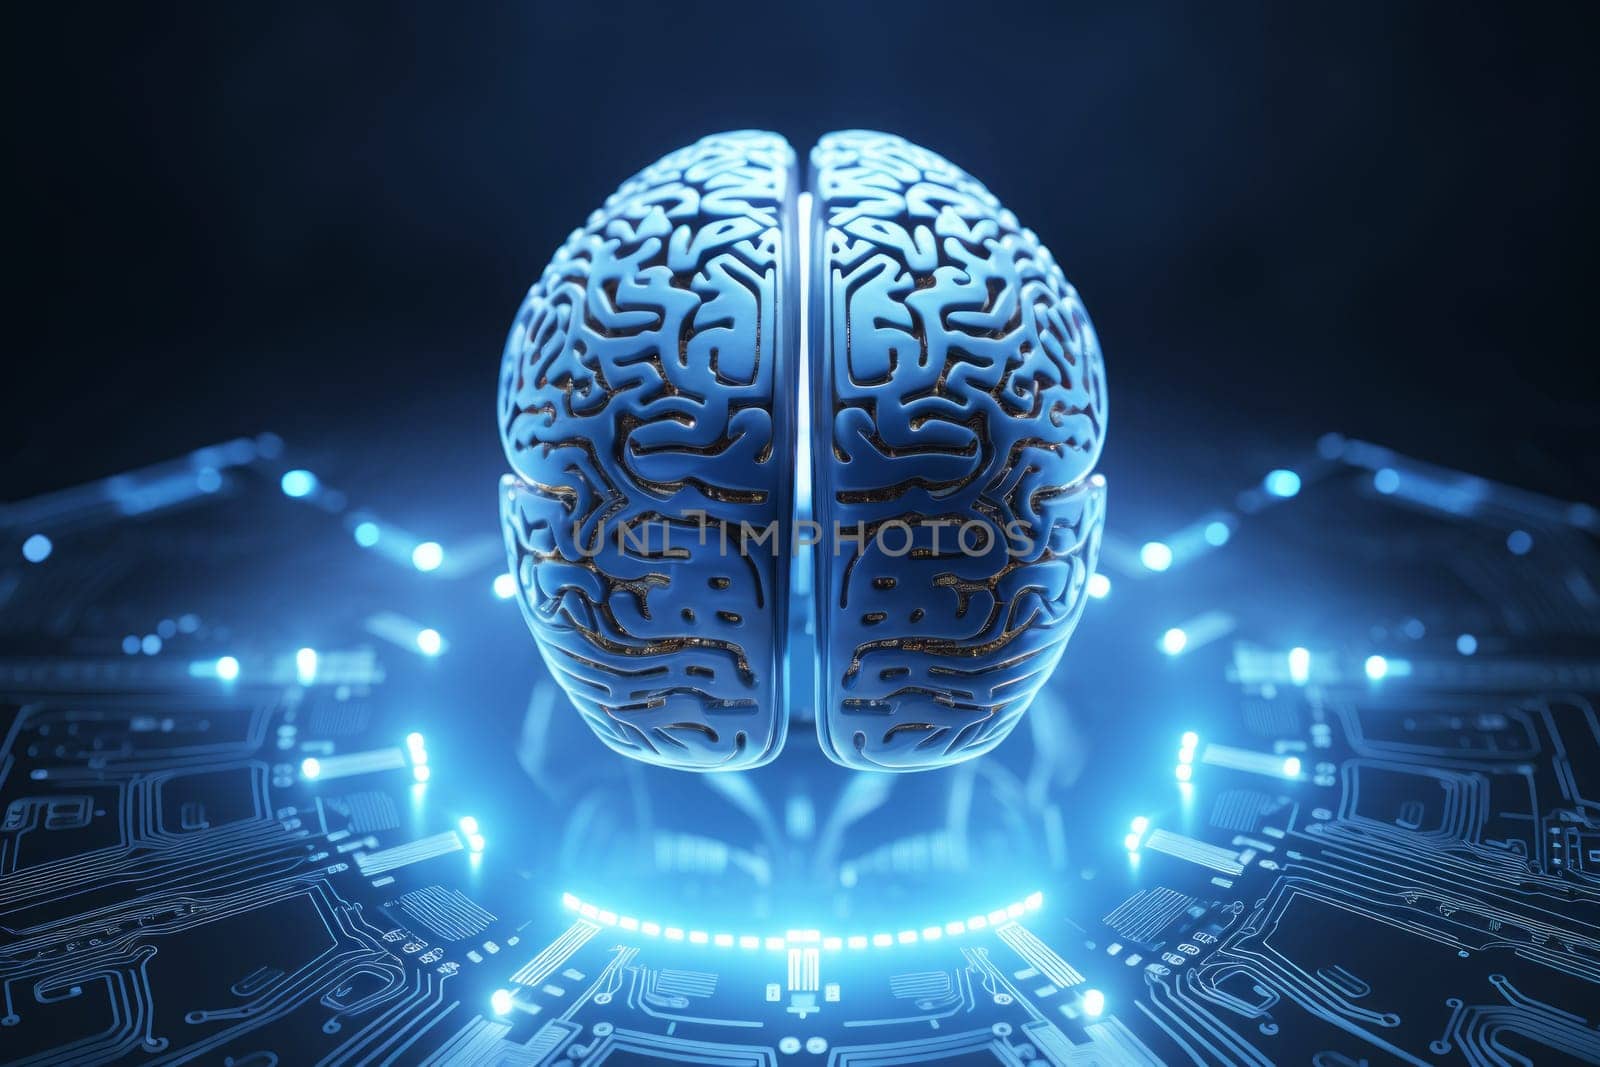 Brain of artificial intelligence on a blue background. Artificial intelligence or neural network concept.